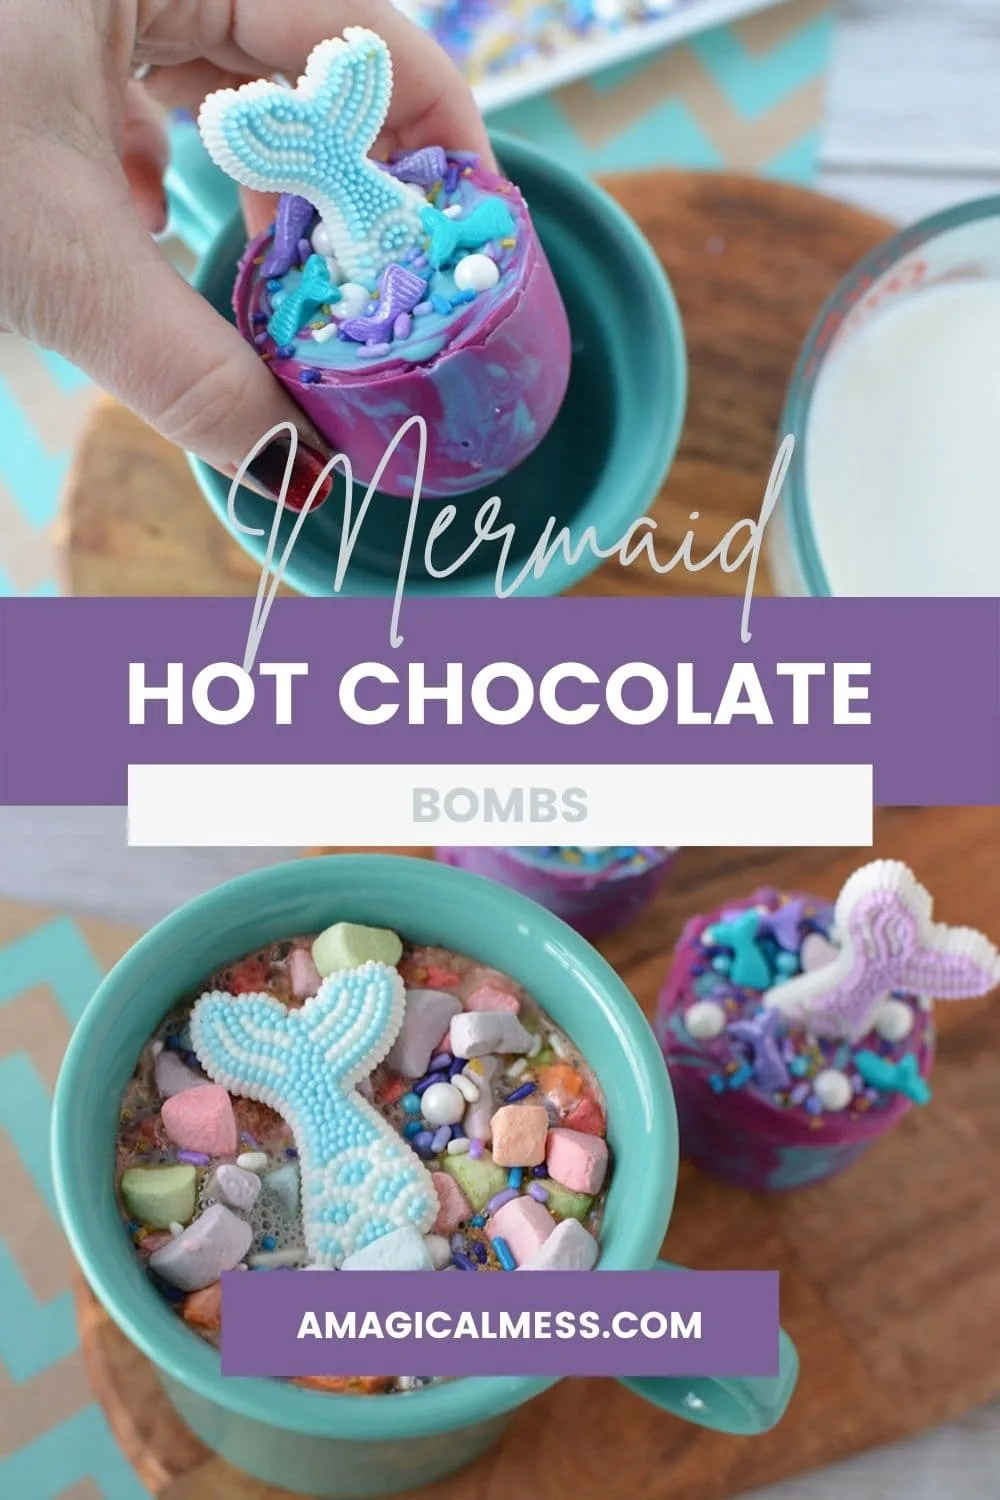 Mermaid hot chocolate. Dropping melt into a mug and finished product.